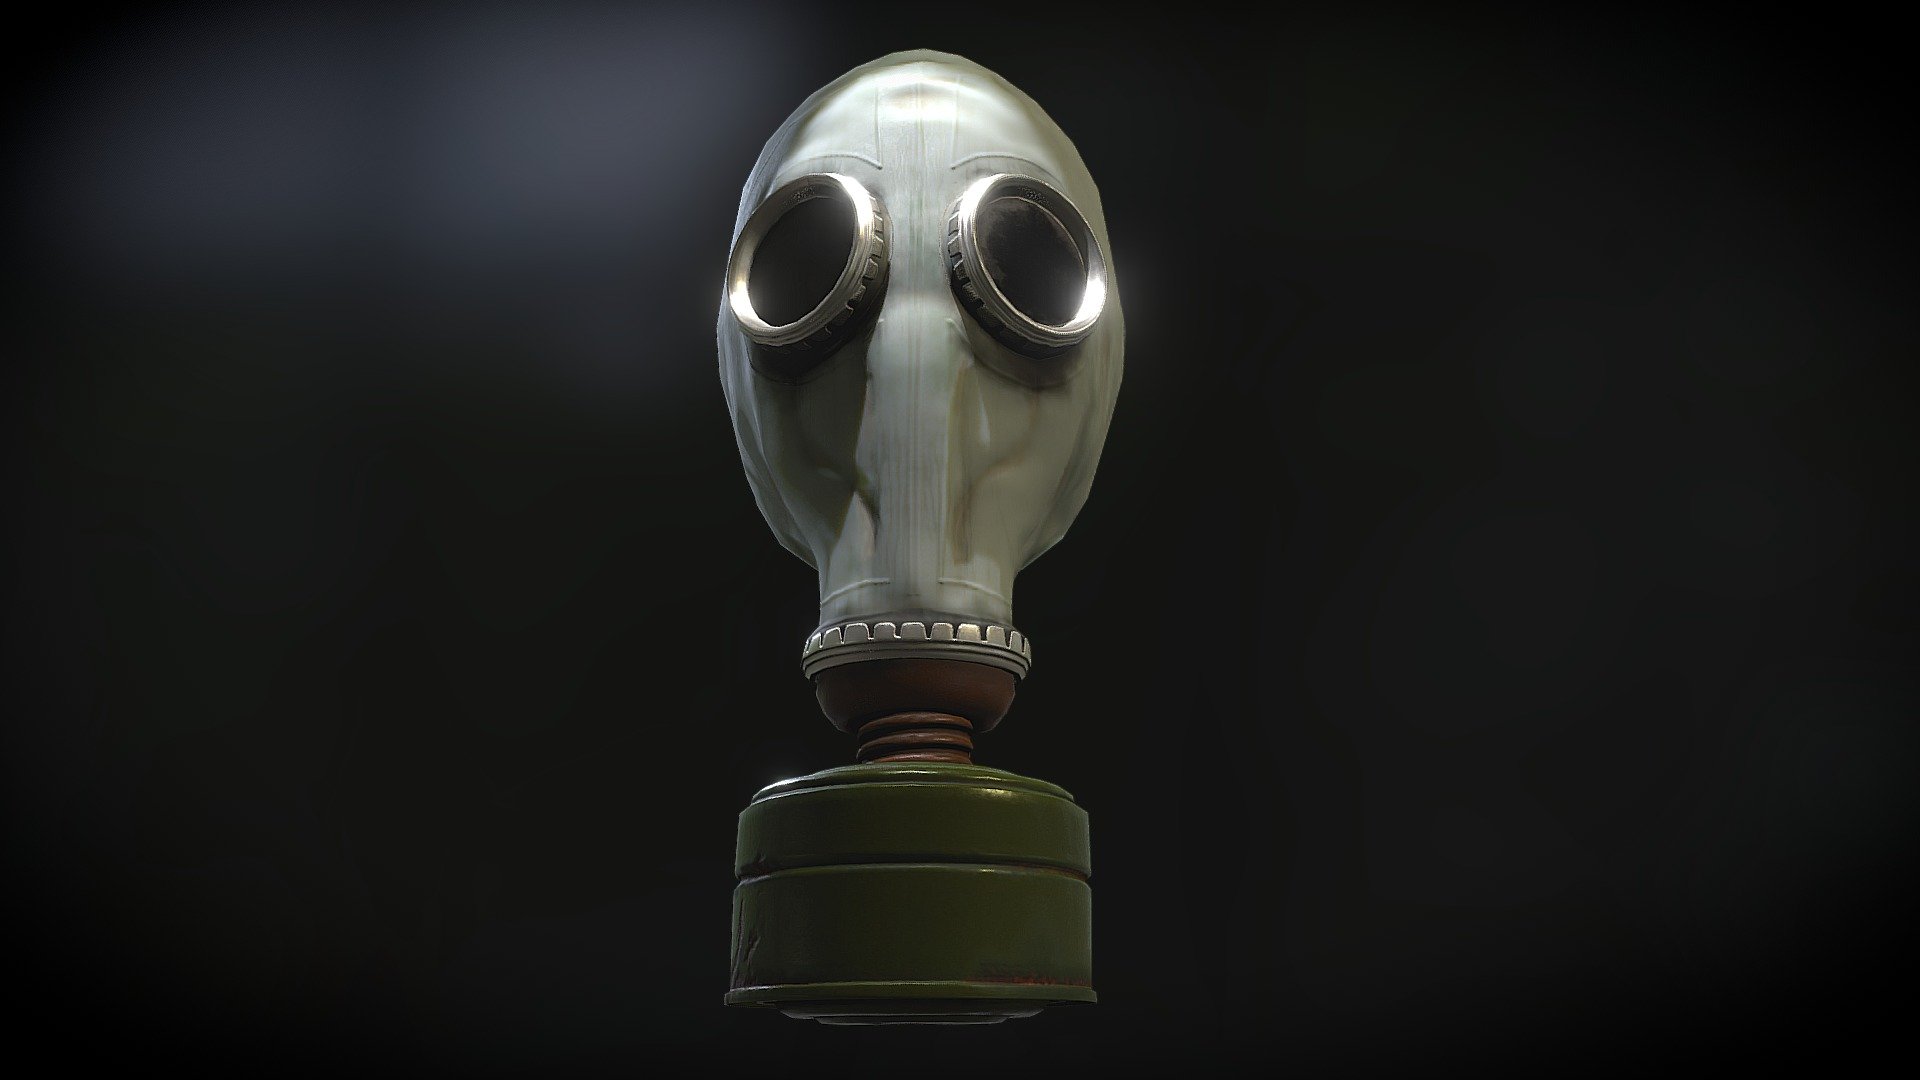 GP-5 gas mask is a Soviet-made single-filter gas mask. It was issued to the Soviet population starting in 1962; production ended in 1990. It is a lightweight mask, weighing 1.09 kg (Wikipedia)
https://en.wikipedia.org/wiki/GP-5_gas_mask
This model was made by hand without mesurements. scale and parts vary from actural GP-5 sizes and shapes.




Free for use with credit given &ldquo;G-P5 Gas Mask by MattOades AKA MattMakesSwords